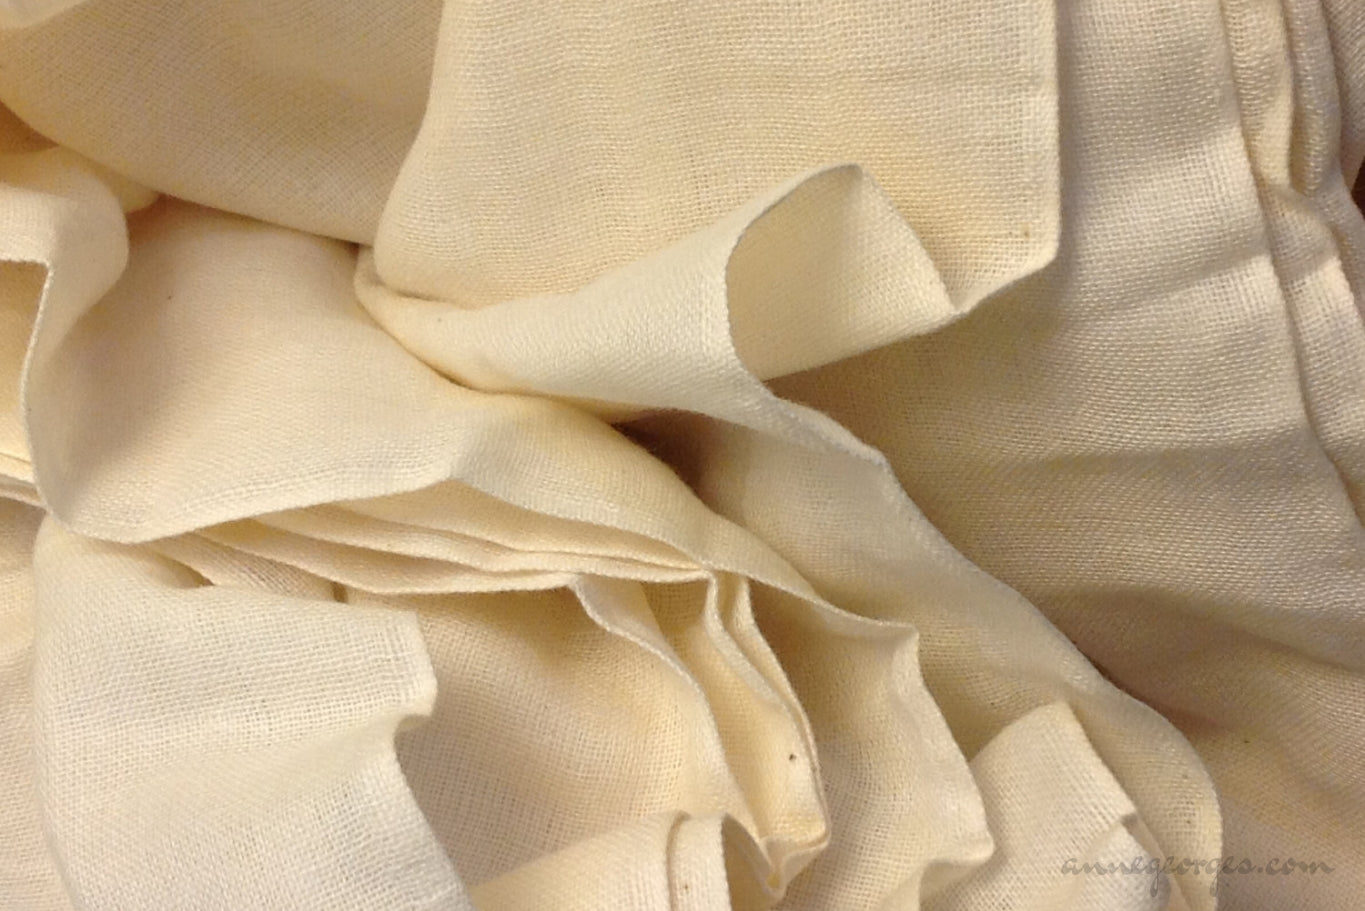 Organic Cotton double gauze fabric by the yard. Unbleached cotton